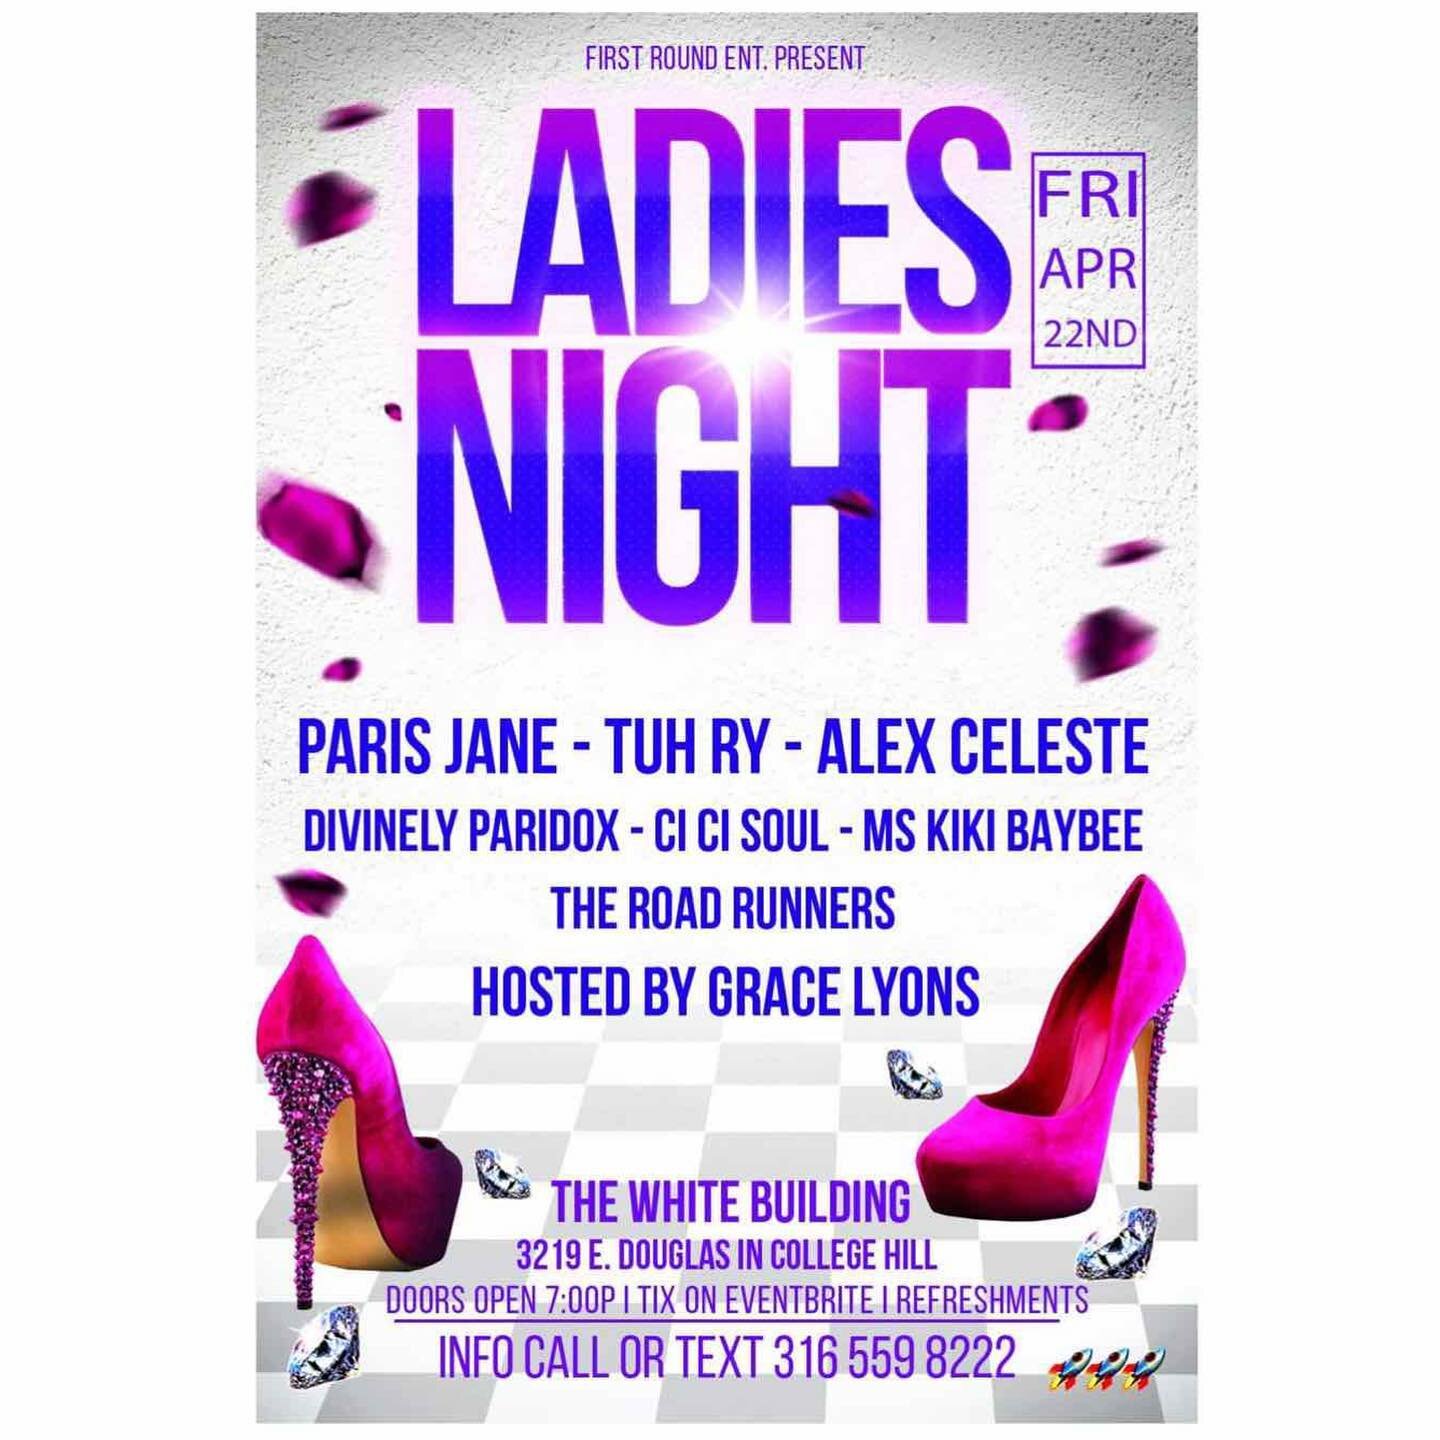 I have two shows this week! Ladies Night at the White building on April 22nd and A24 at Monikahouse on April 24th! Come out and support if you can.